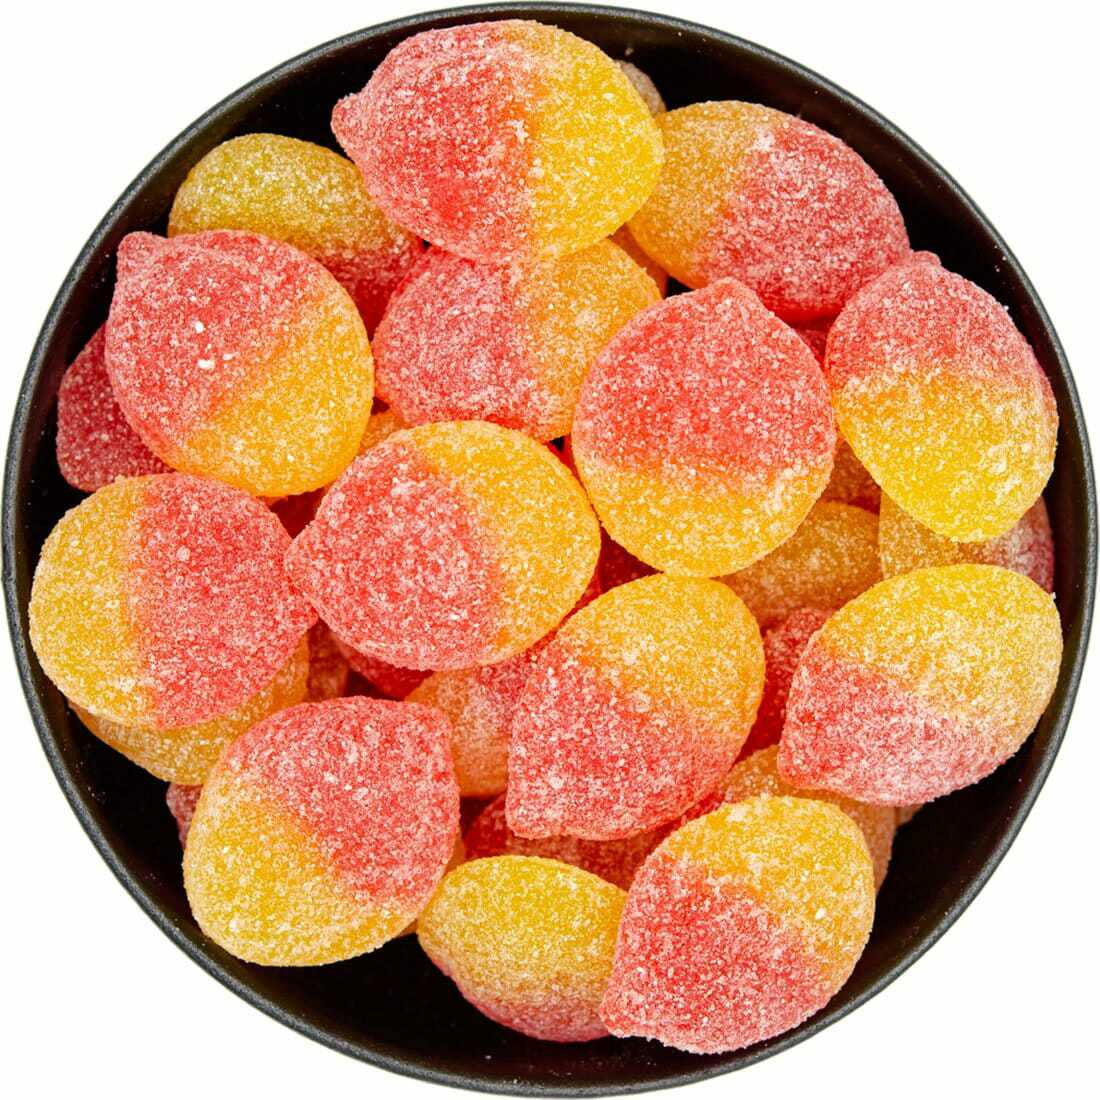 Allan Candy Sour Peach Slices, 2.5kg/5.5lbs., Bag, {Imported from Canada}